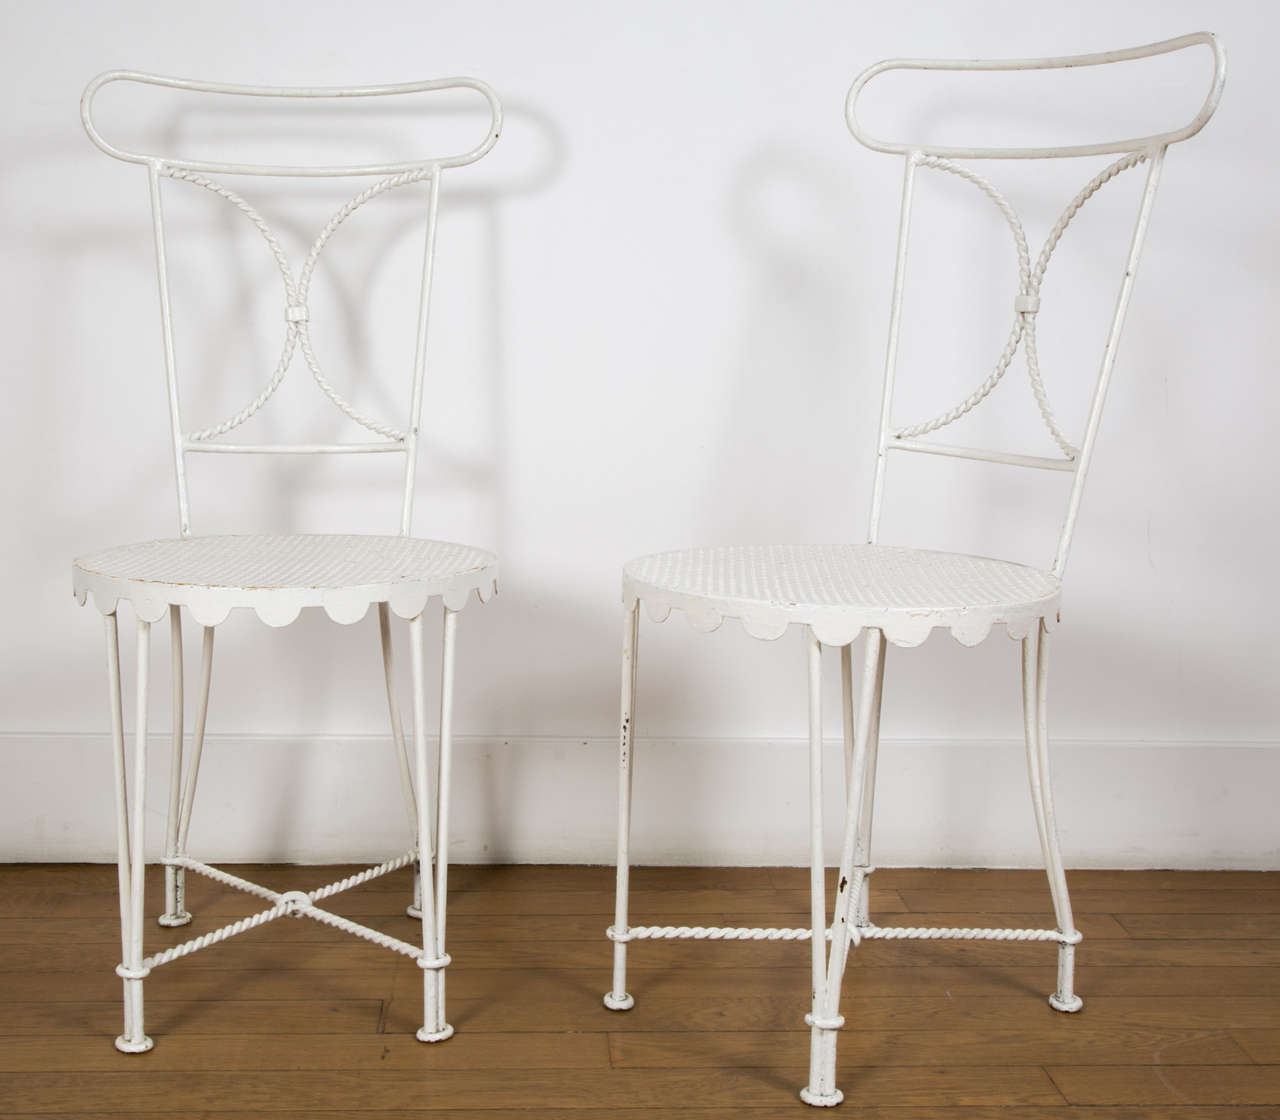 Pretty pair of wrought iron garden chairs, by Gilbert POILLERAT (1902-1988)
Chair back and base openwork. Chair back and base with a twisted strut.
Sit surrounded with a festoon. 
Sit height 43 cm.

Ref : F.Baudot, « Gilbert Poillerat maître